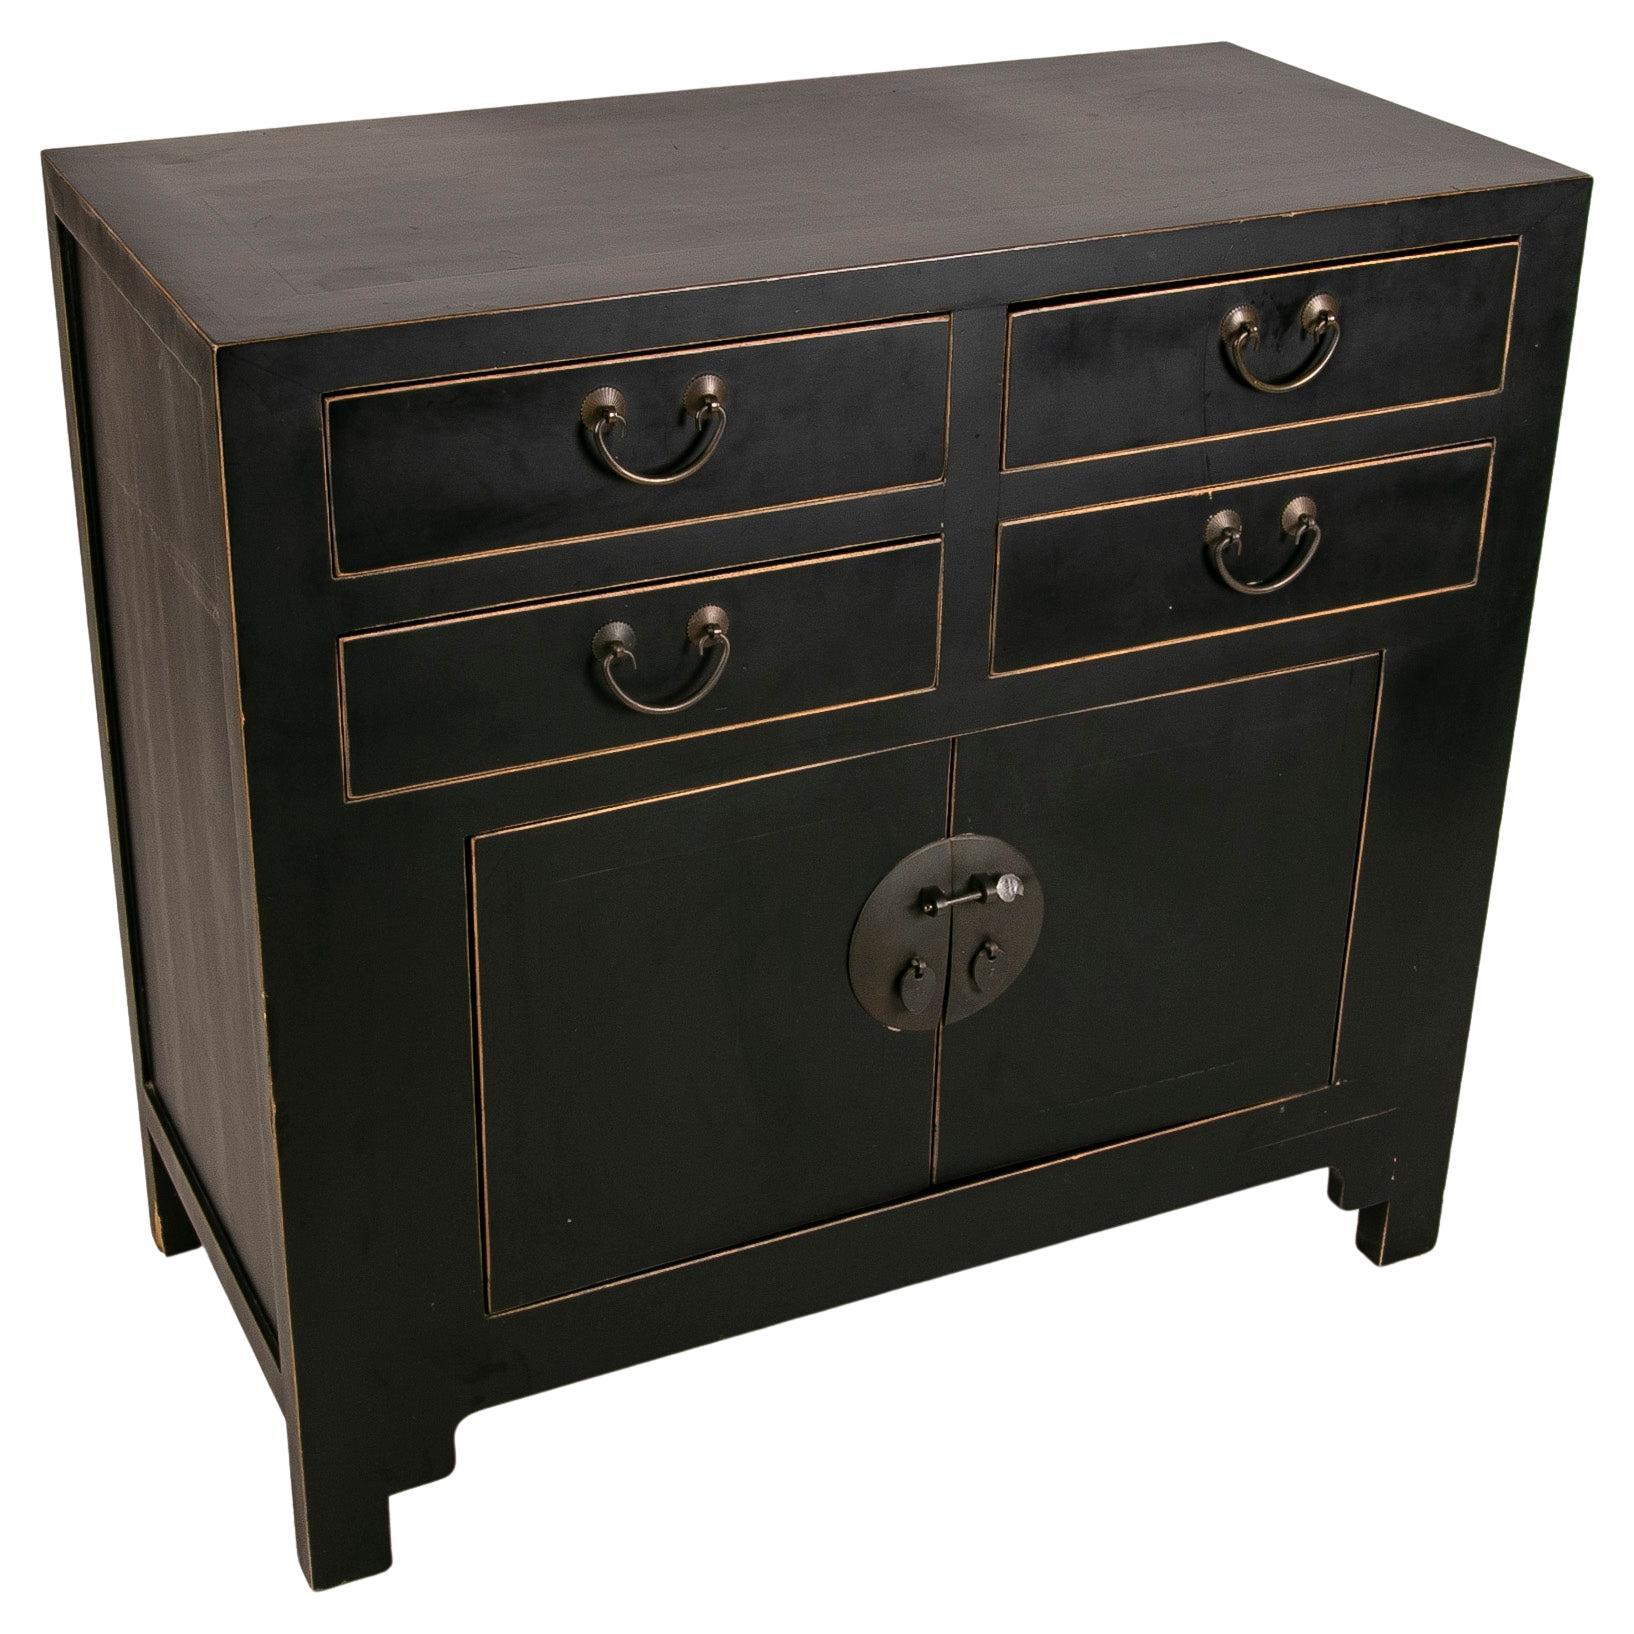 Chest of Drawers in Lacquered Wood with Drawers and Metal Pulls